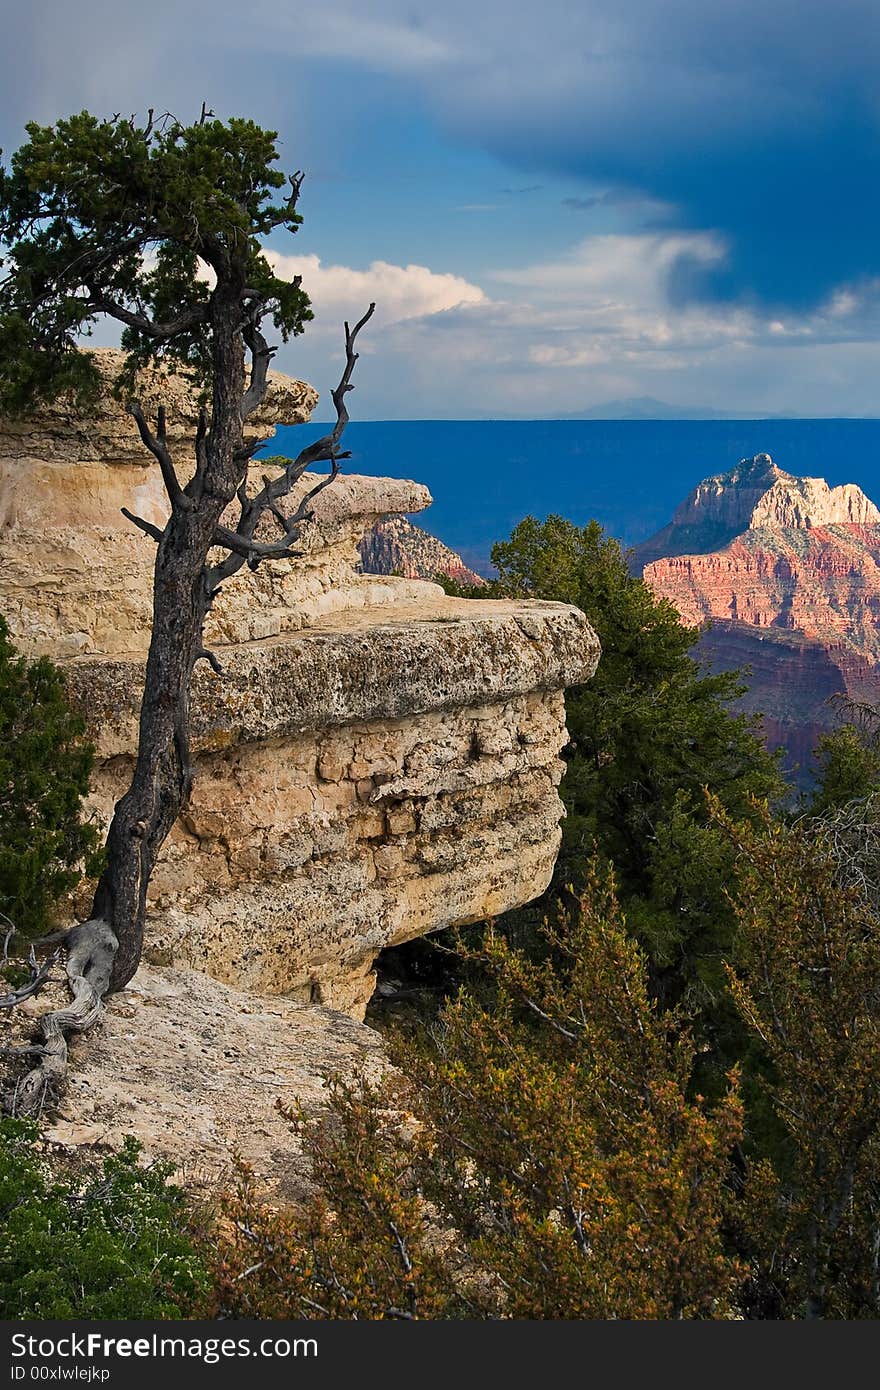 A view from the North Rim of Grand Canyon National Park. A view from the North Rim of Grand Canyon National Park.